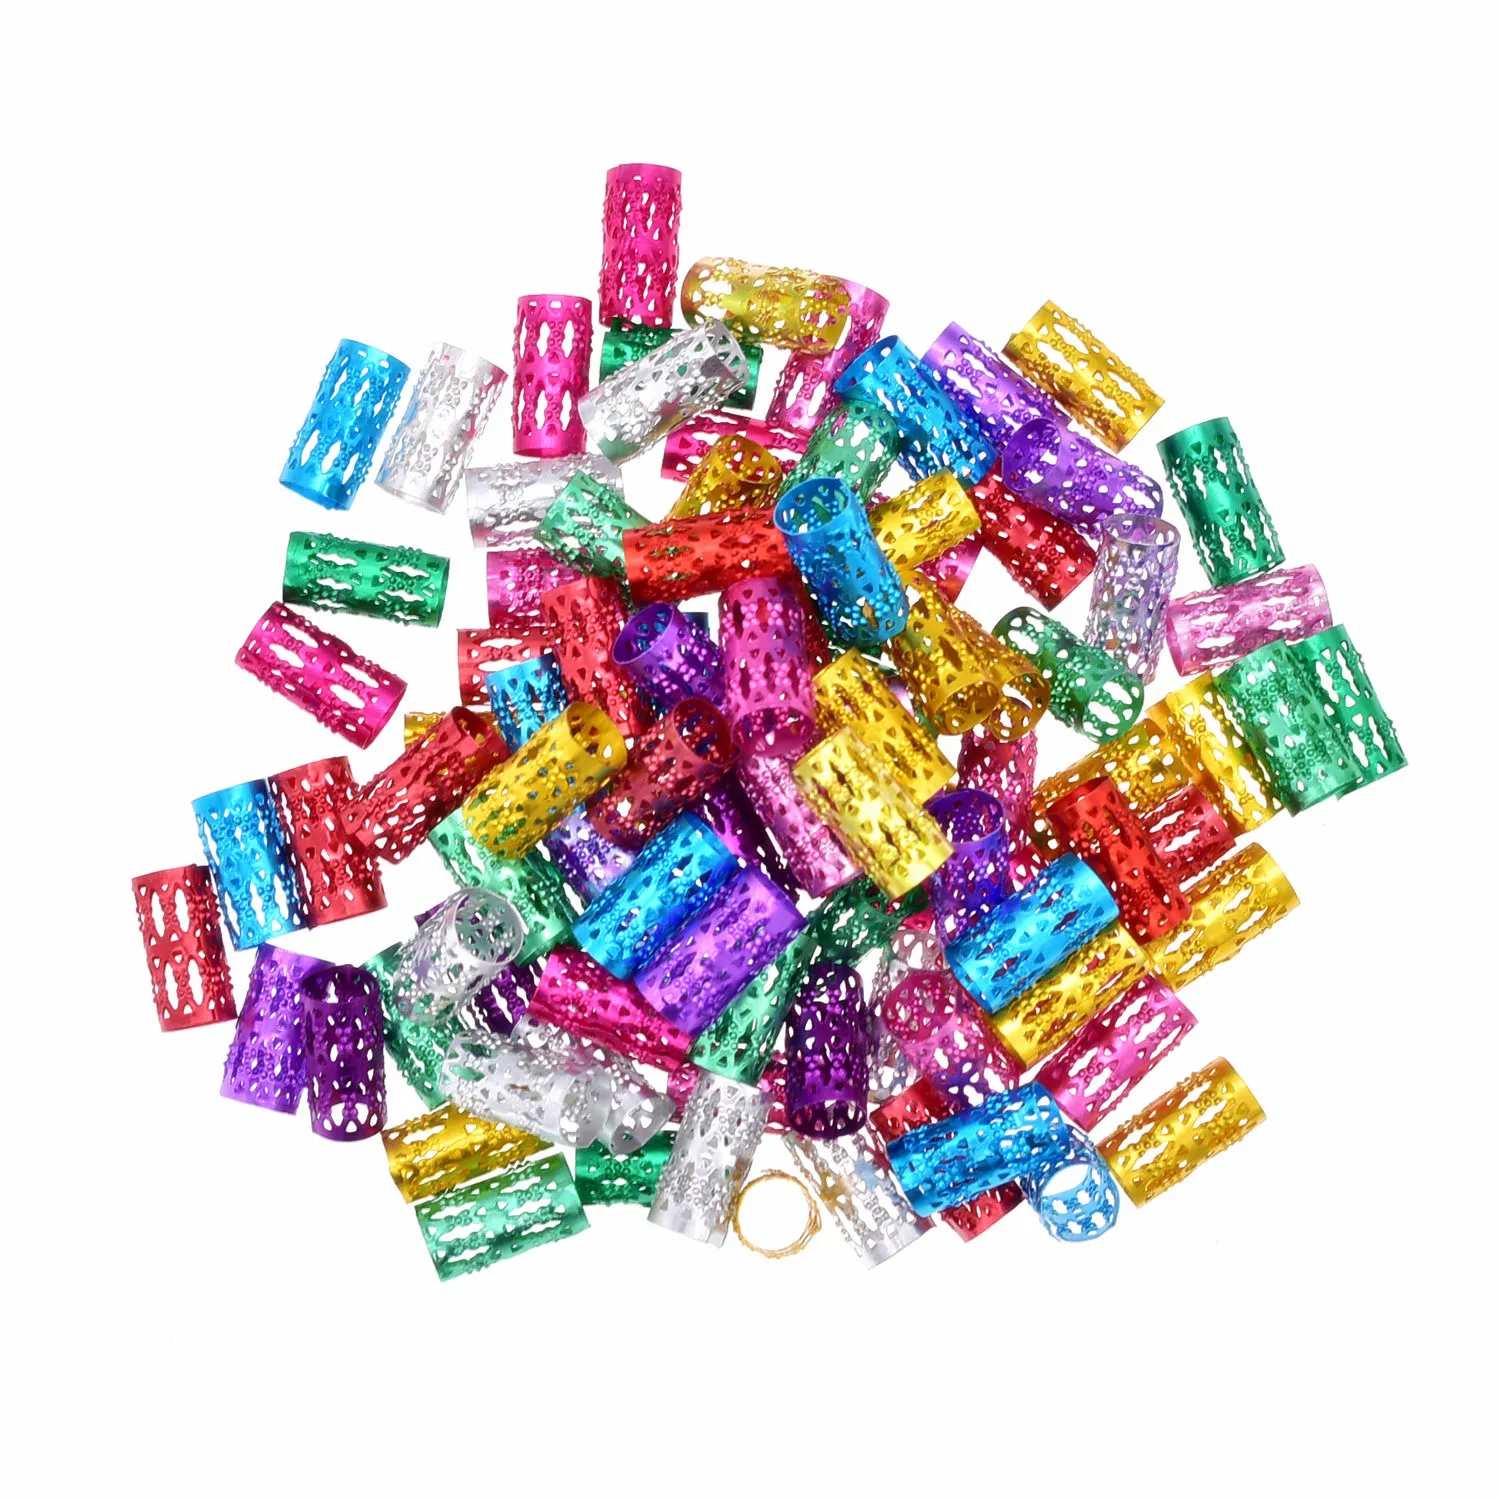 100pcs/bag 15mm Mix Color Beads Hair Dreadlock Beads Adjustable Hair Braid Rings Cuff Clips Tube Hair Styling Accessories